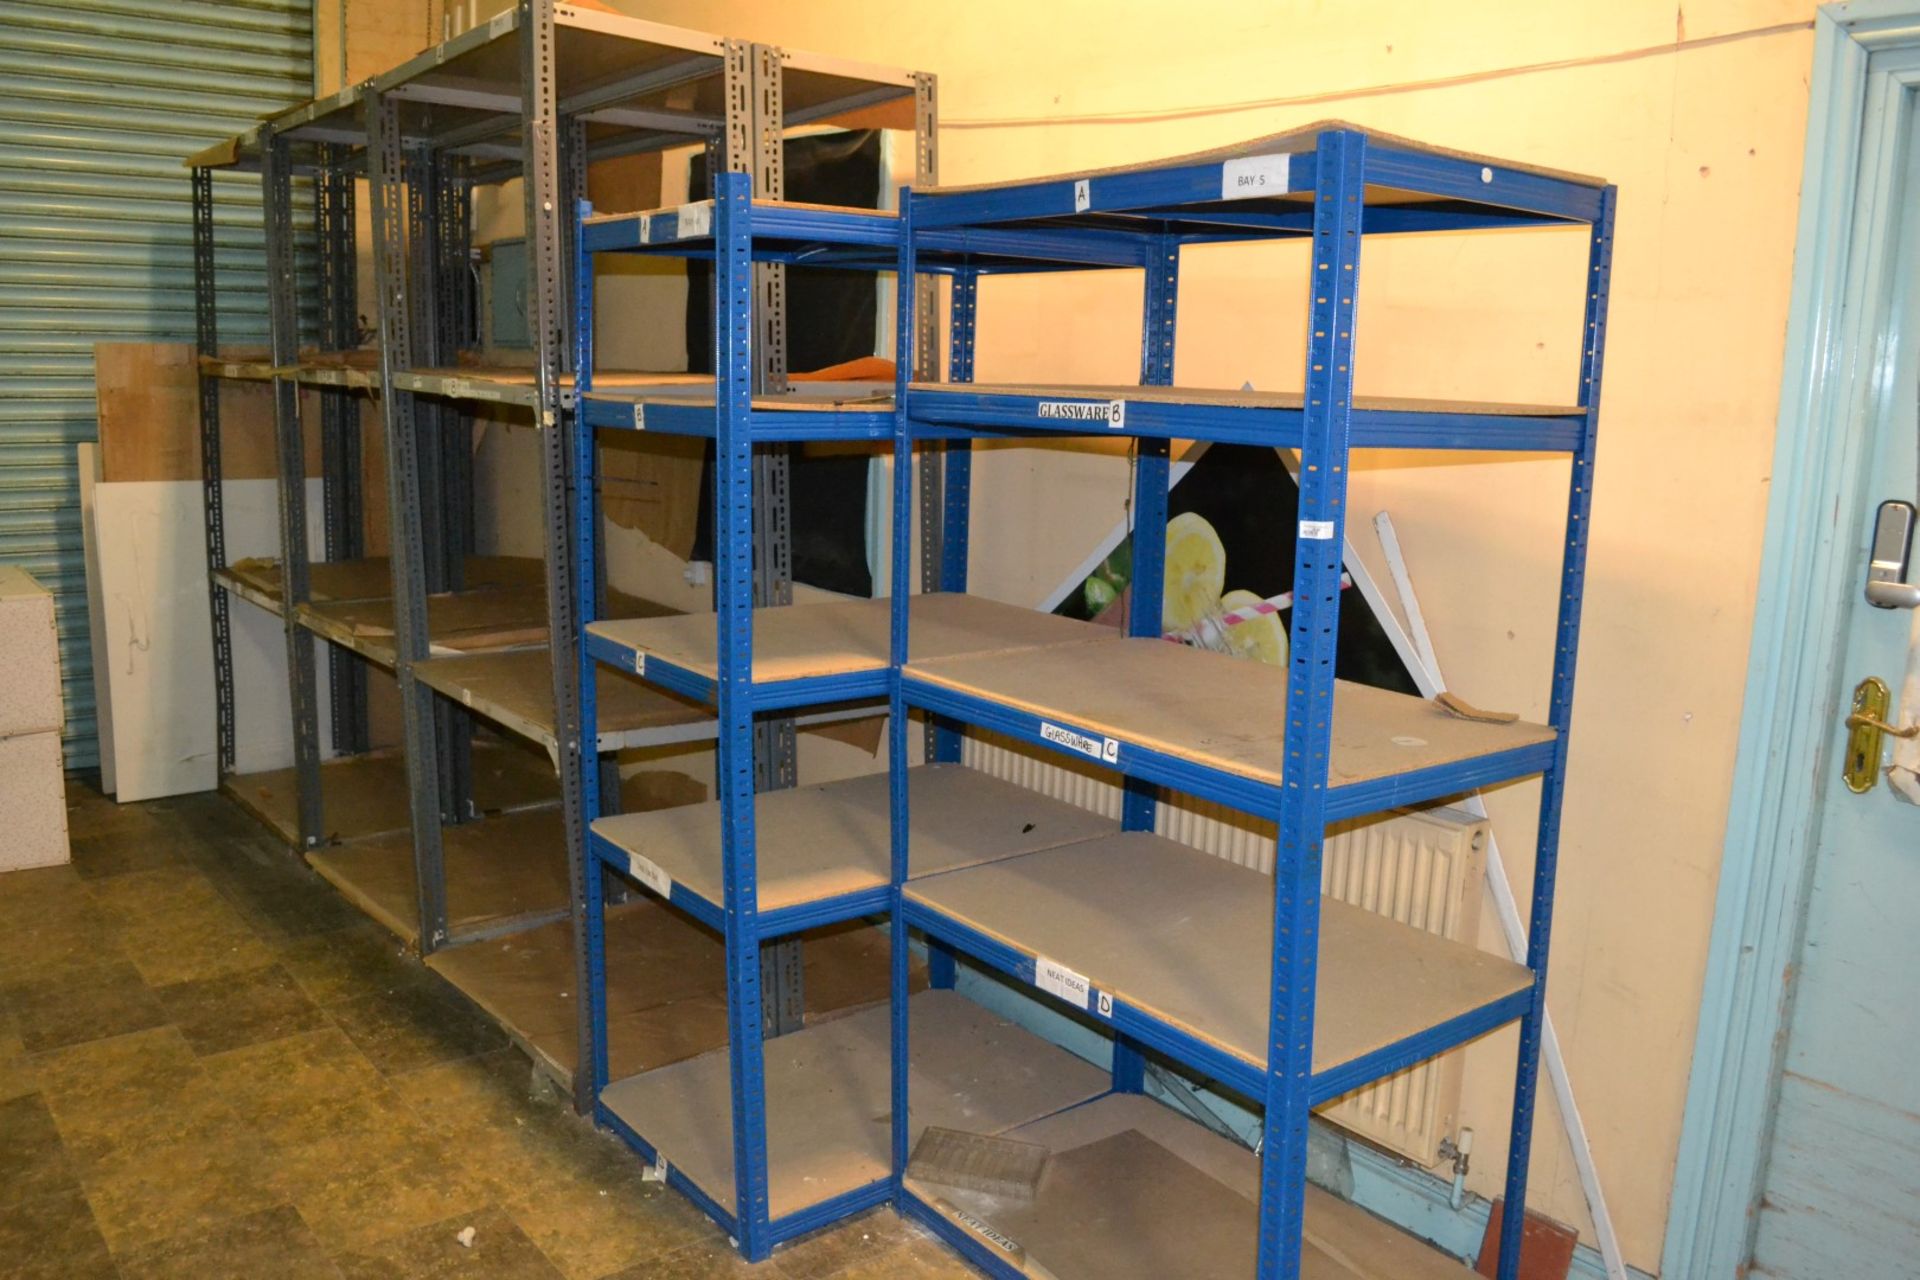 9 x Various Pieces of Steel Shelving - Various Sizes Included - BB GF PTP - CL351 - Location: - Image 3 of 6